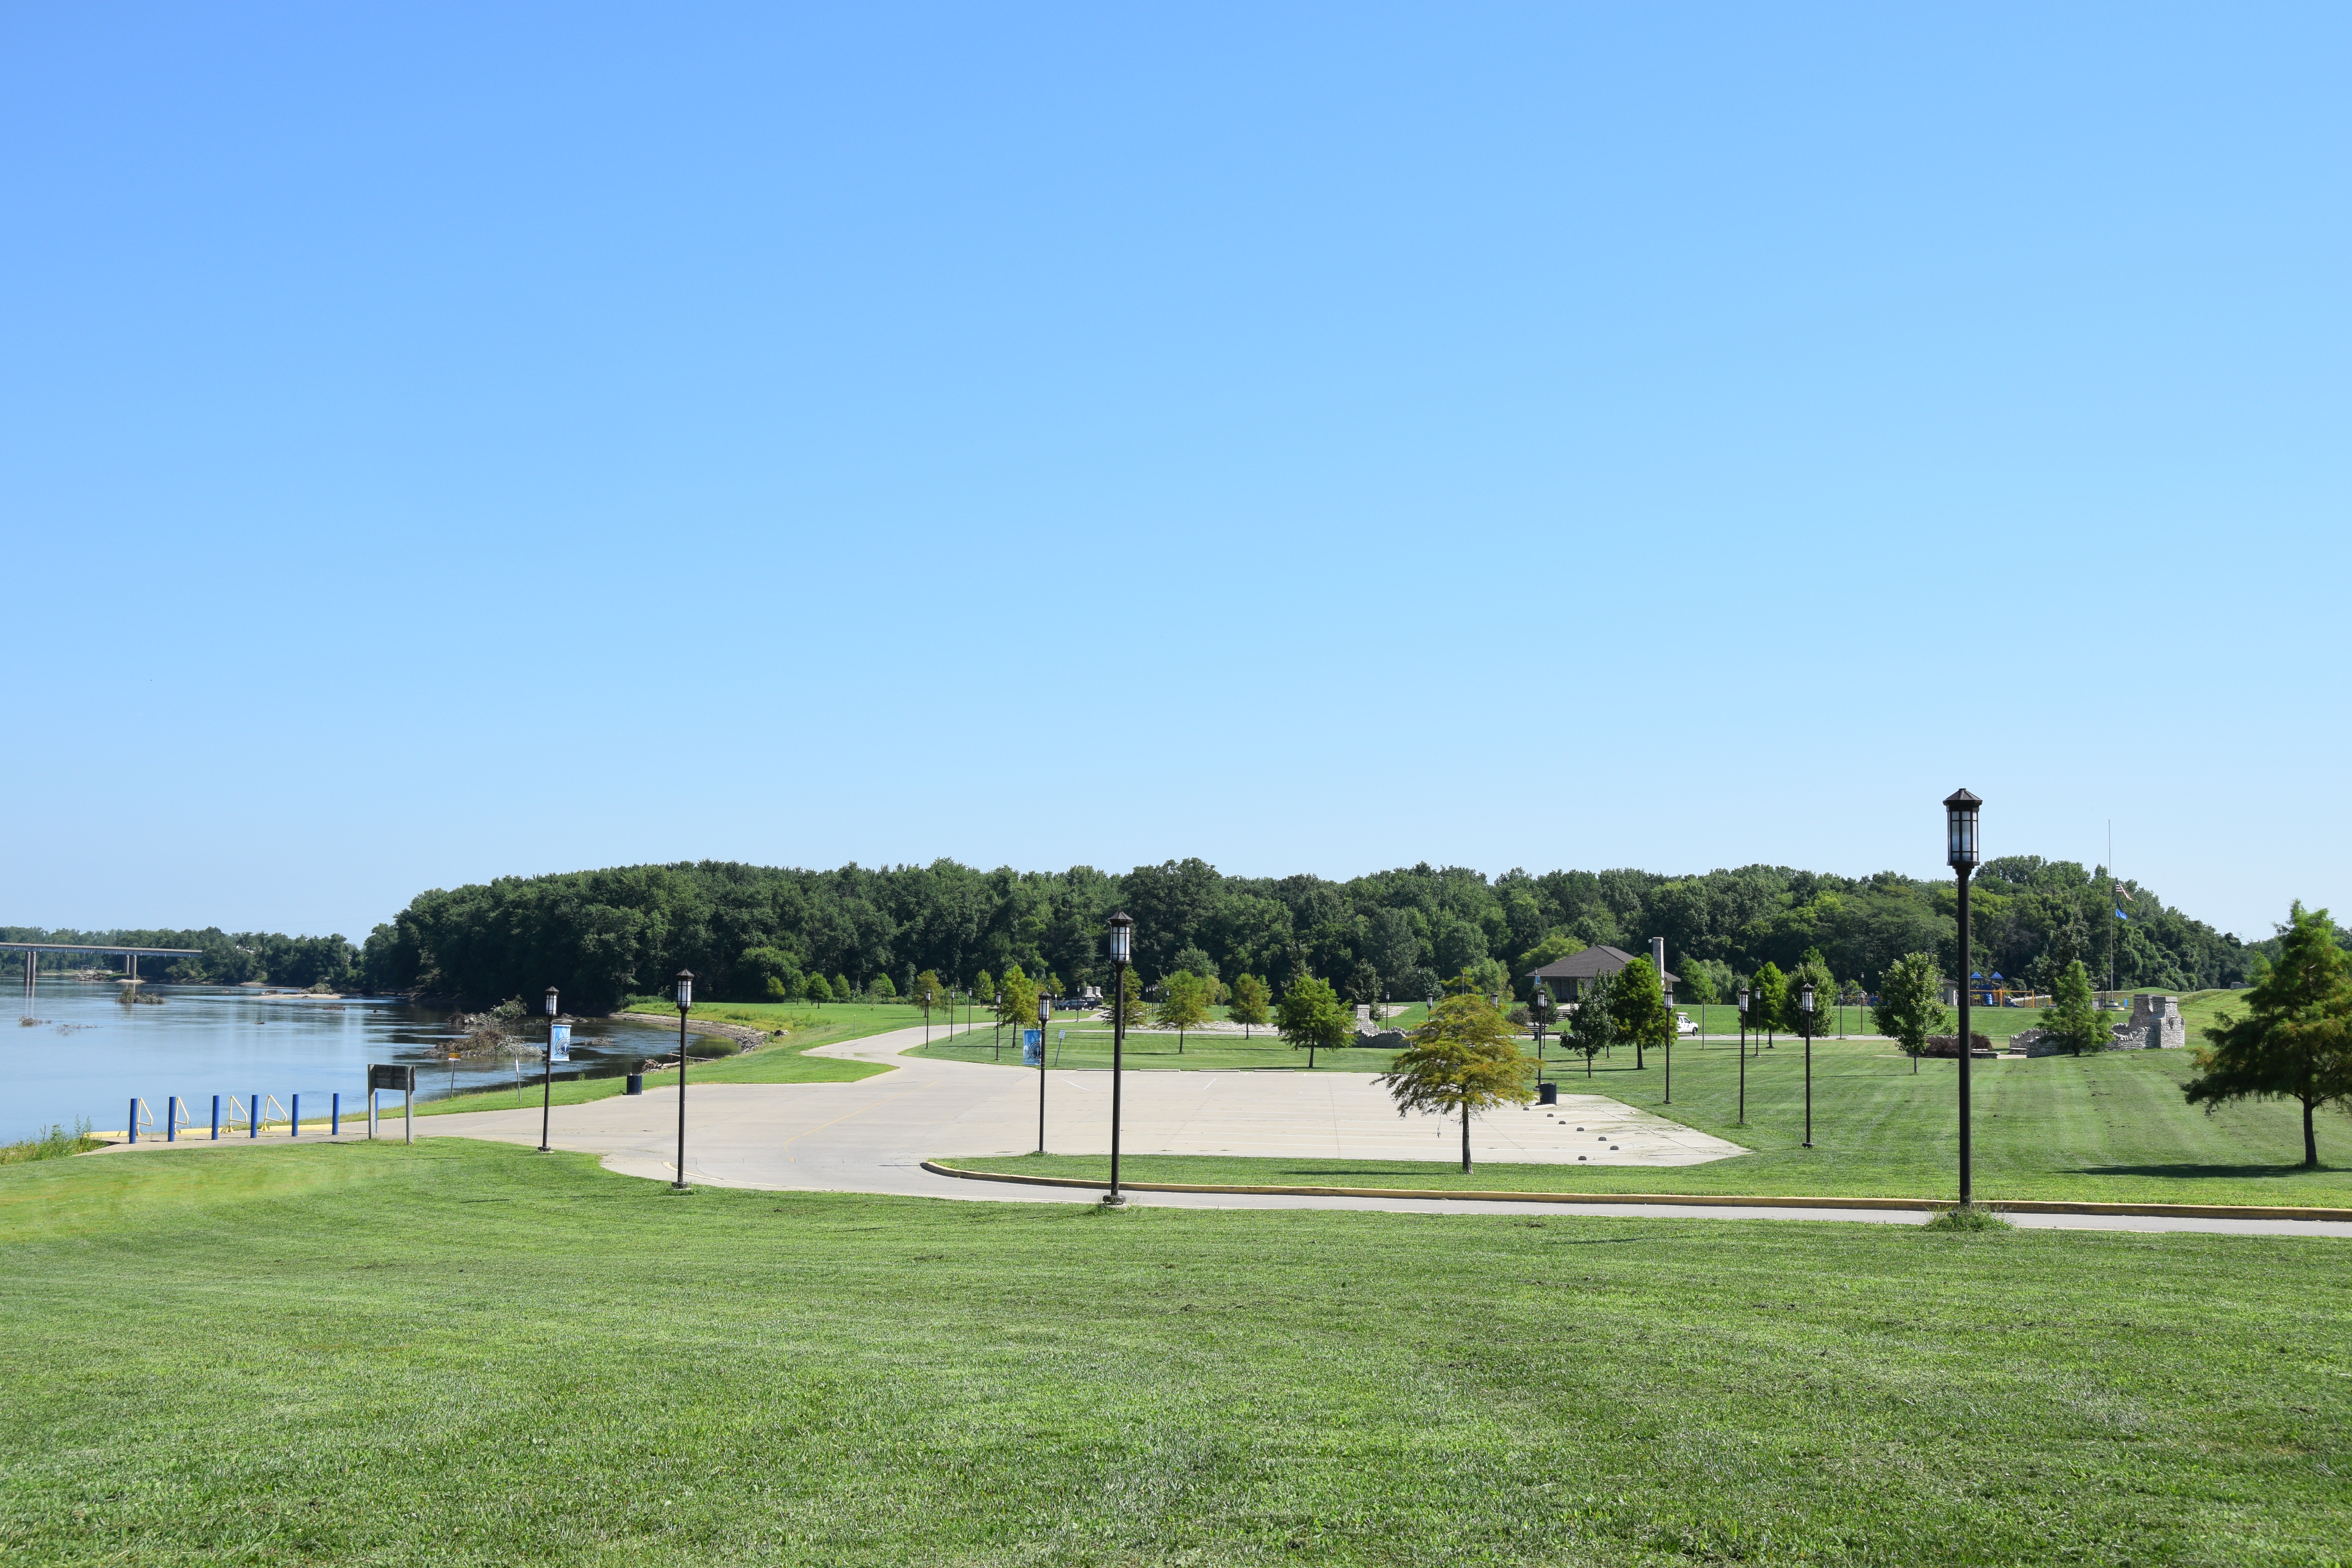 Photo of Kimmell Park and Wabash River